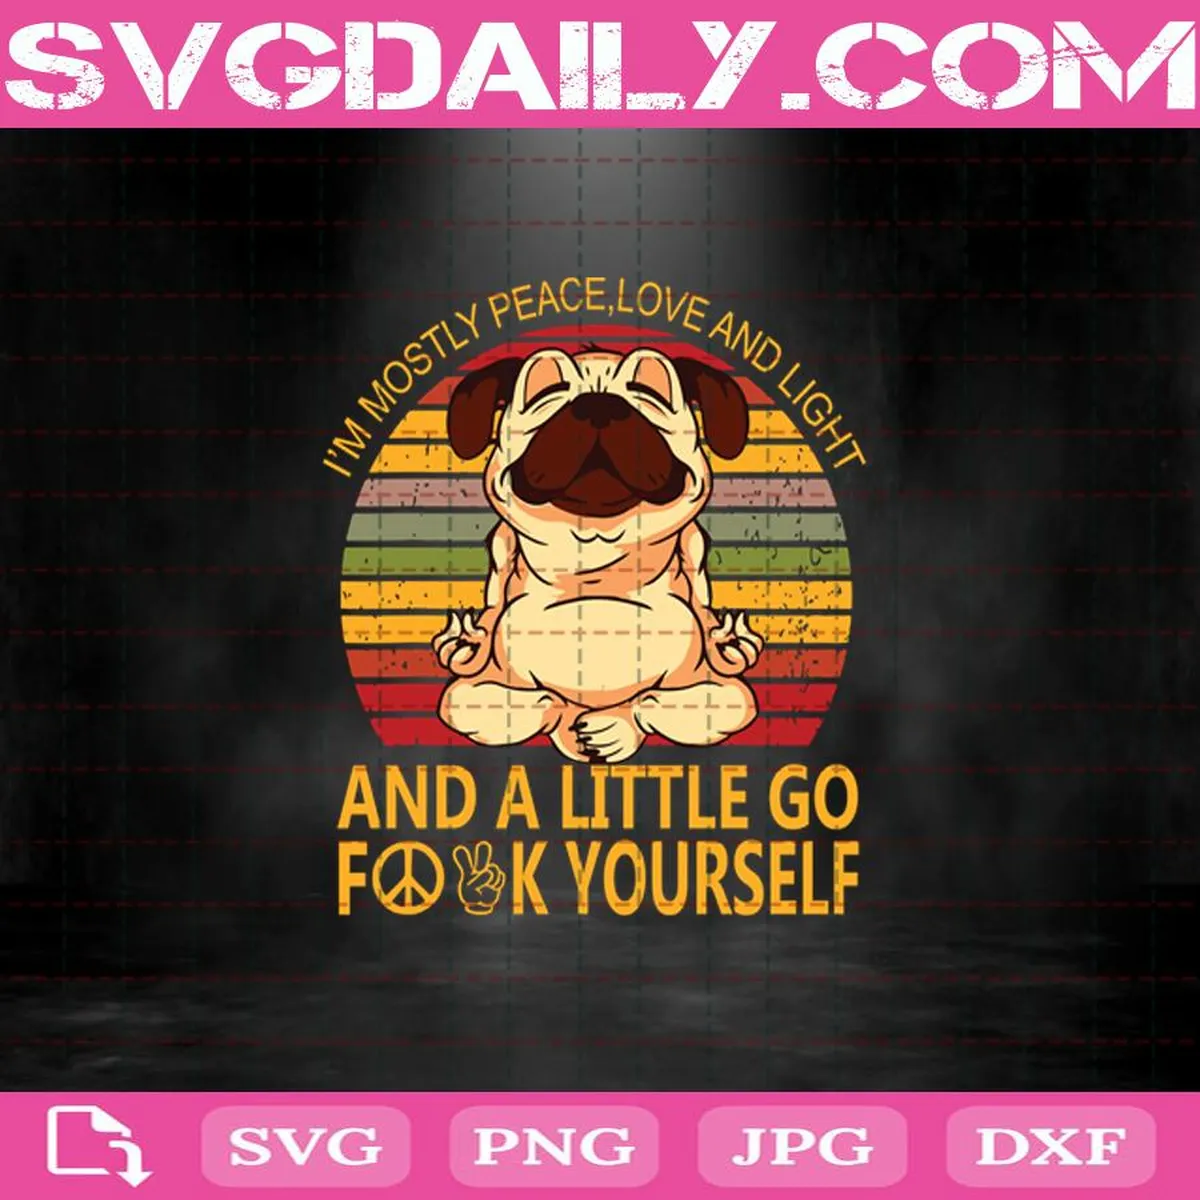 I'm Mostly Peace Love And Light And A Little Go Fuck Yourself Svg, Funny Yoga Svg, Yoga Pug Dog Svg, Pug Dog Svg, Yoga Svg